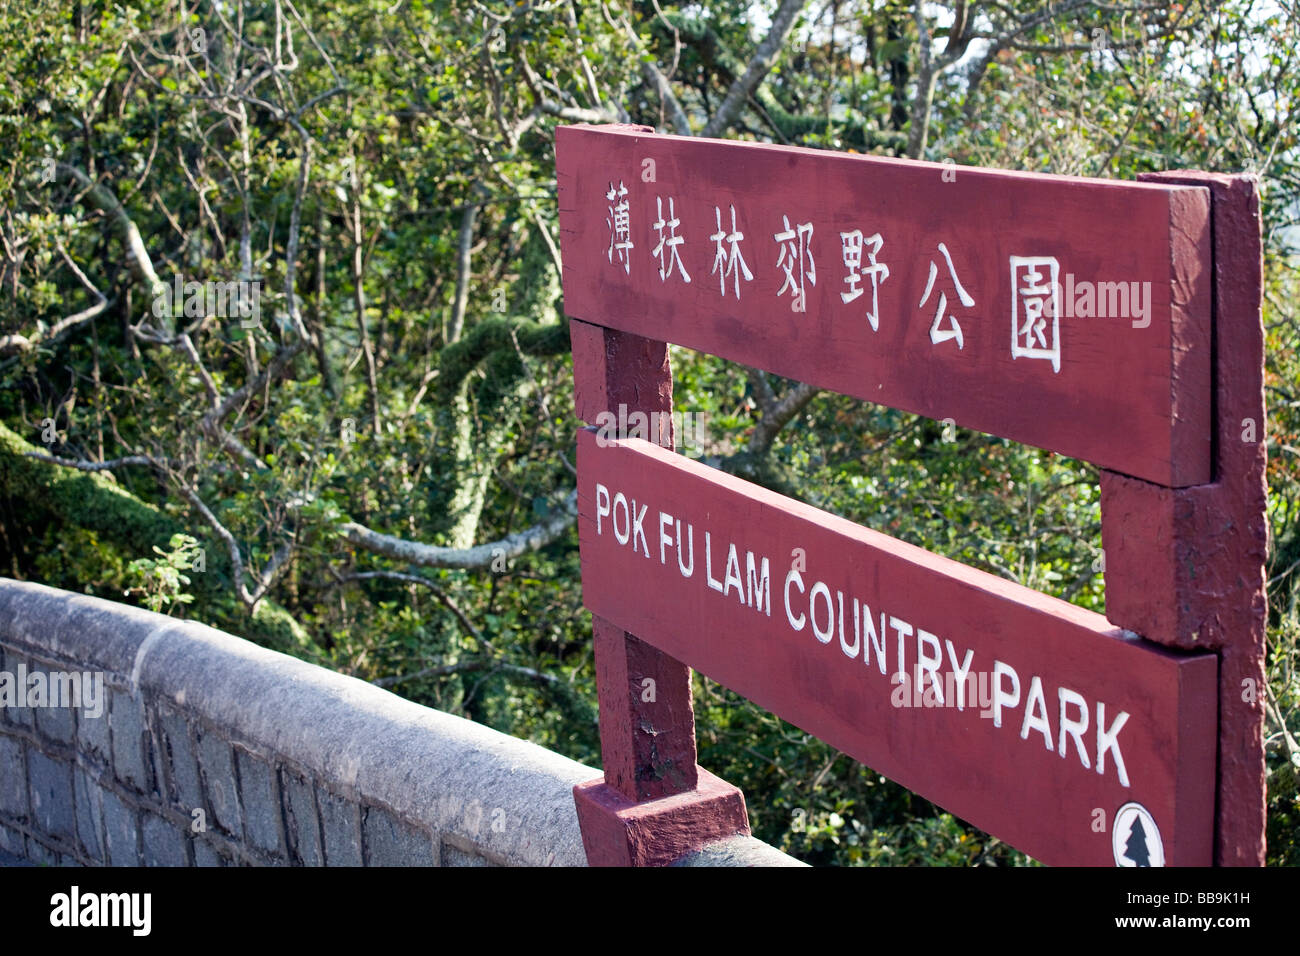 A sign for Pok Fu Lam Country Park is seen on Victoria Peak in Hong Kong Stock Photo